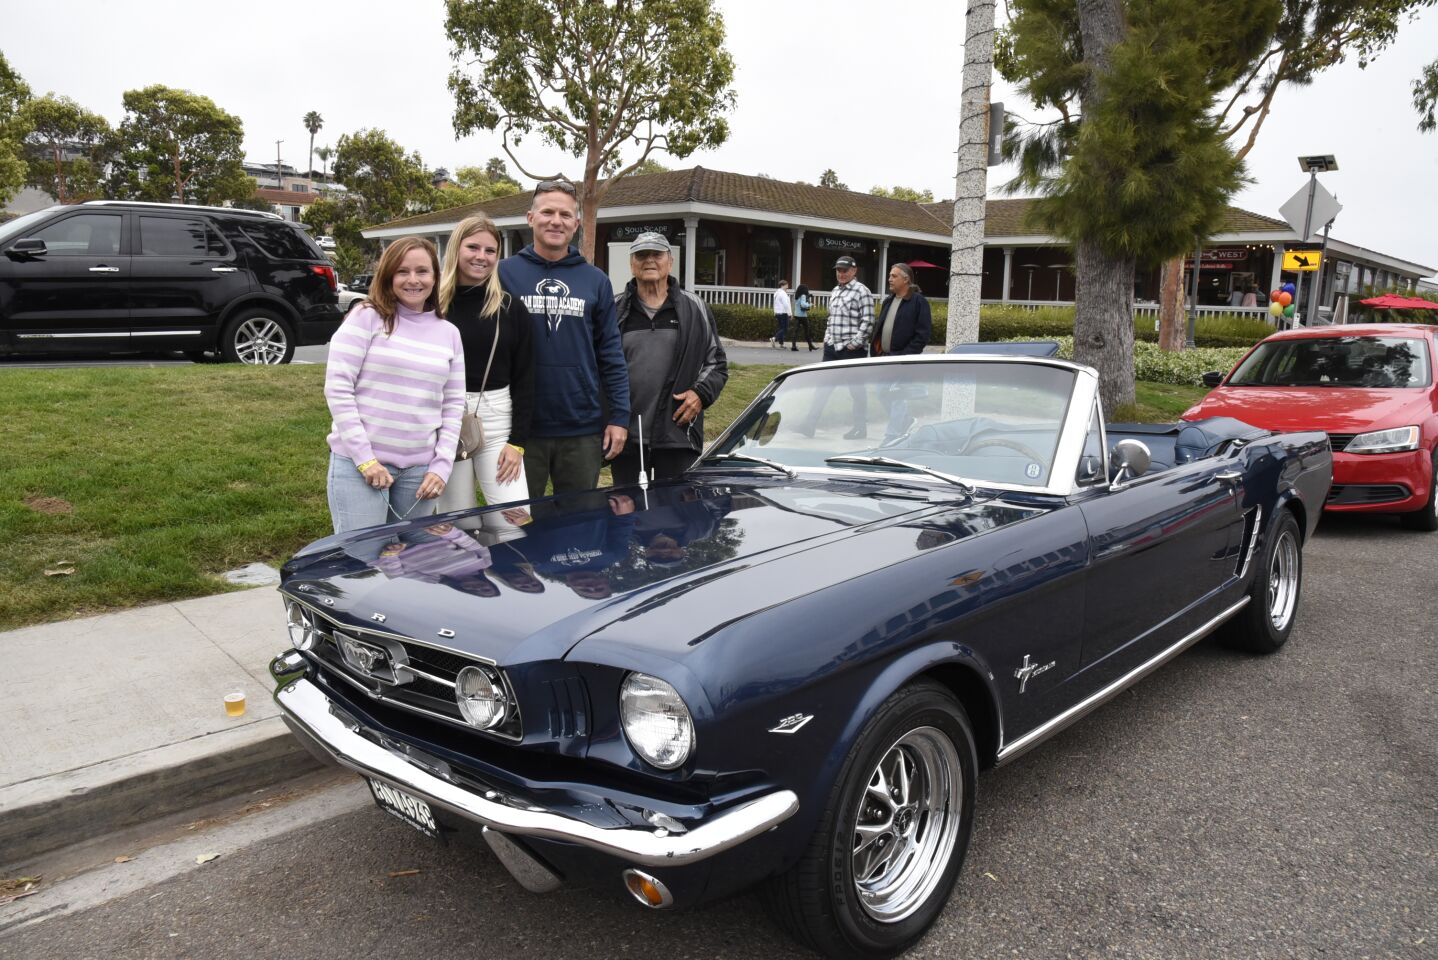 Jenny Whibbs, Maggie Whibbs, Vinnie Whibbs, David Babcock, with their classic Mustang